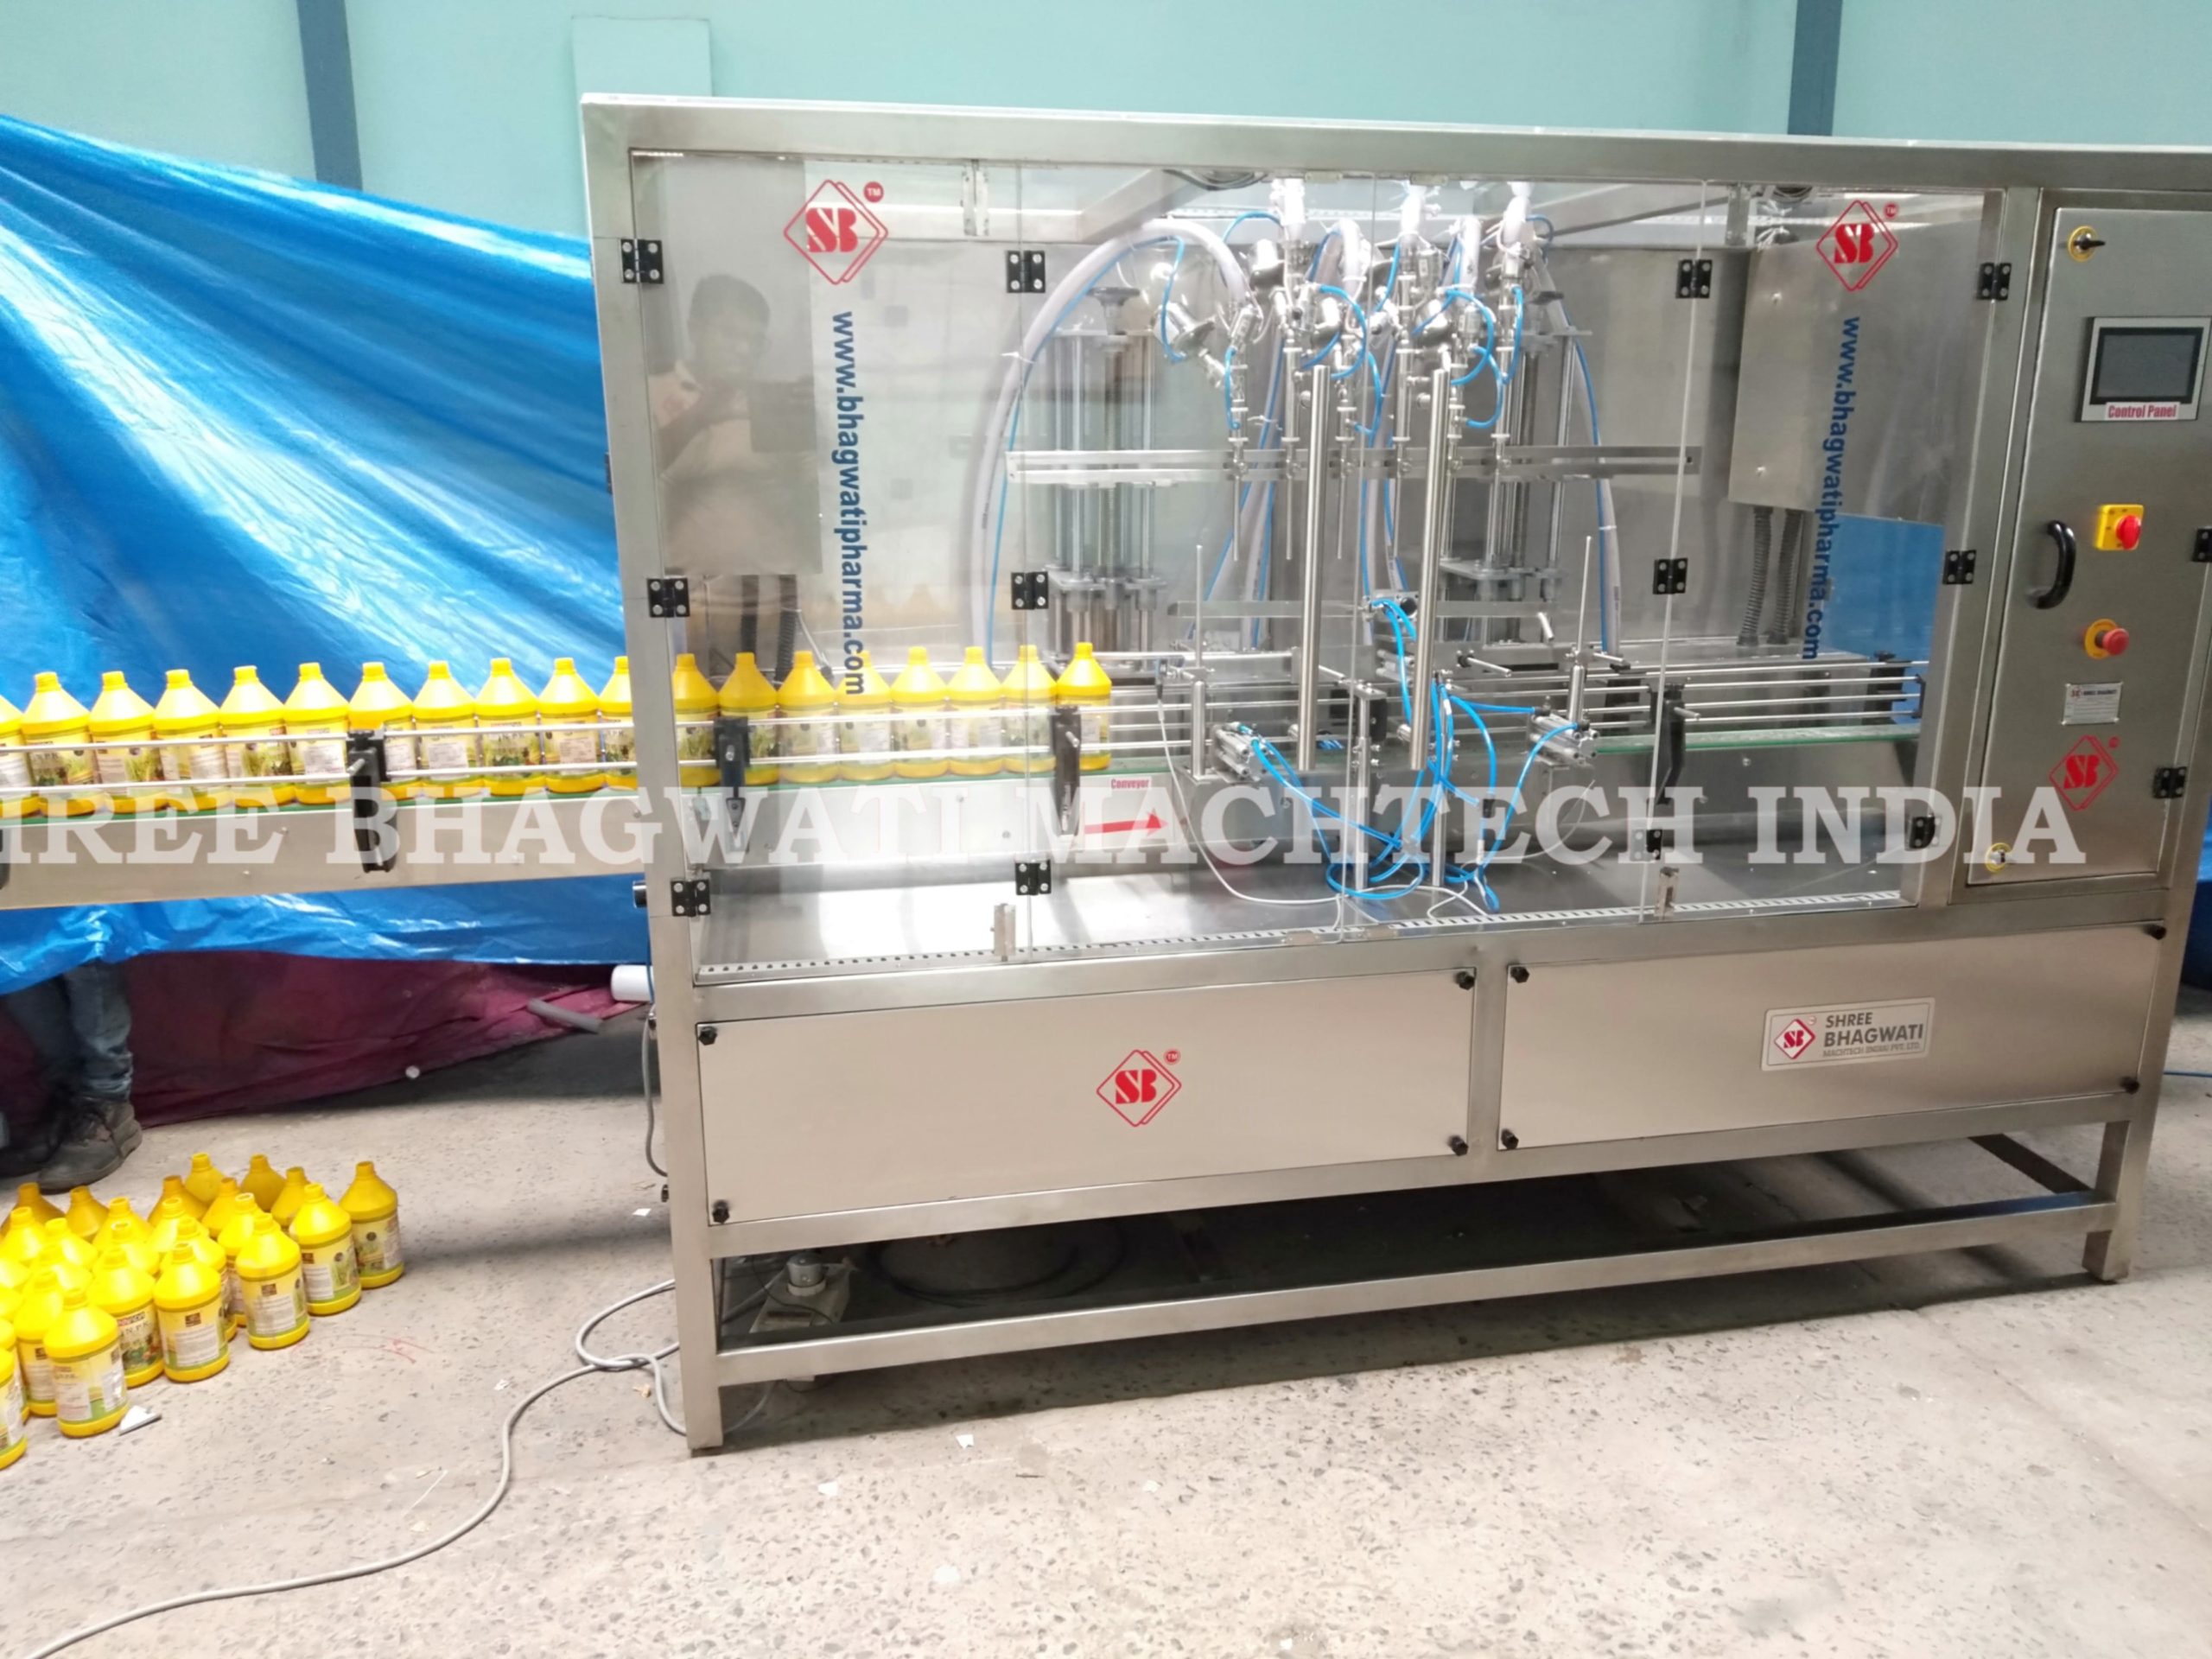 How to Make Automatic Bottle Filling Machine